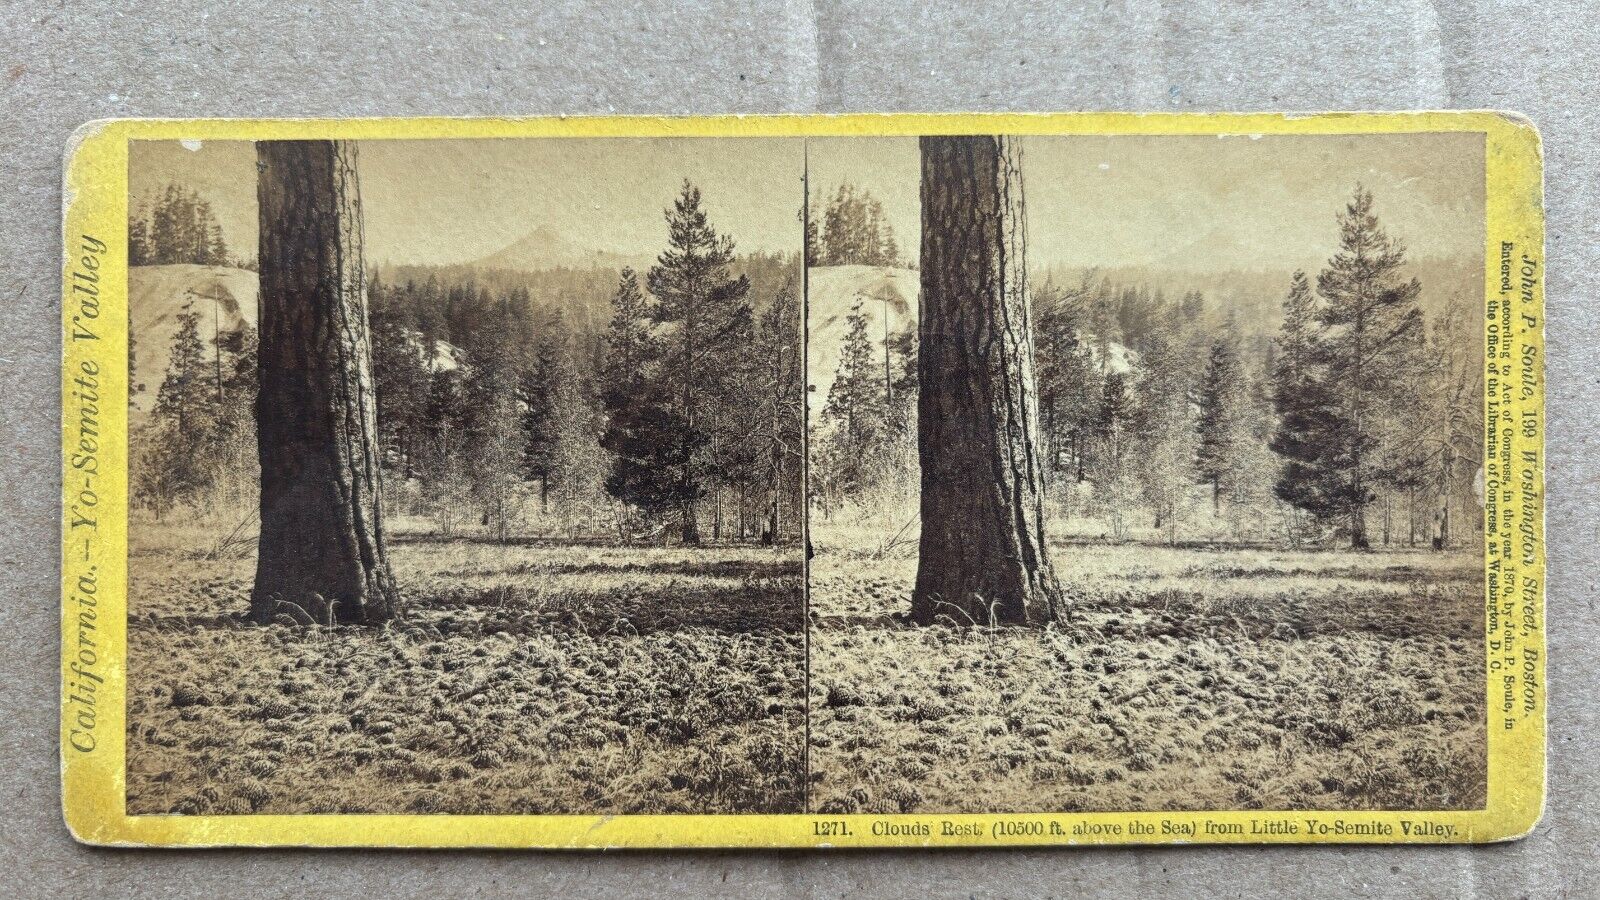 California Stereoview Clouds Rest From Little Yosemite Valley by Soule 1871